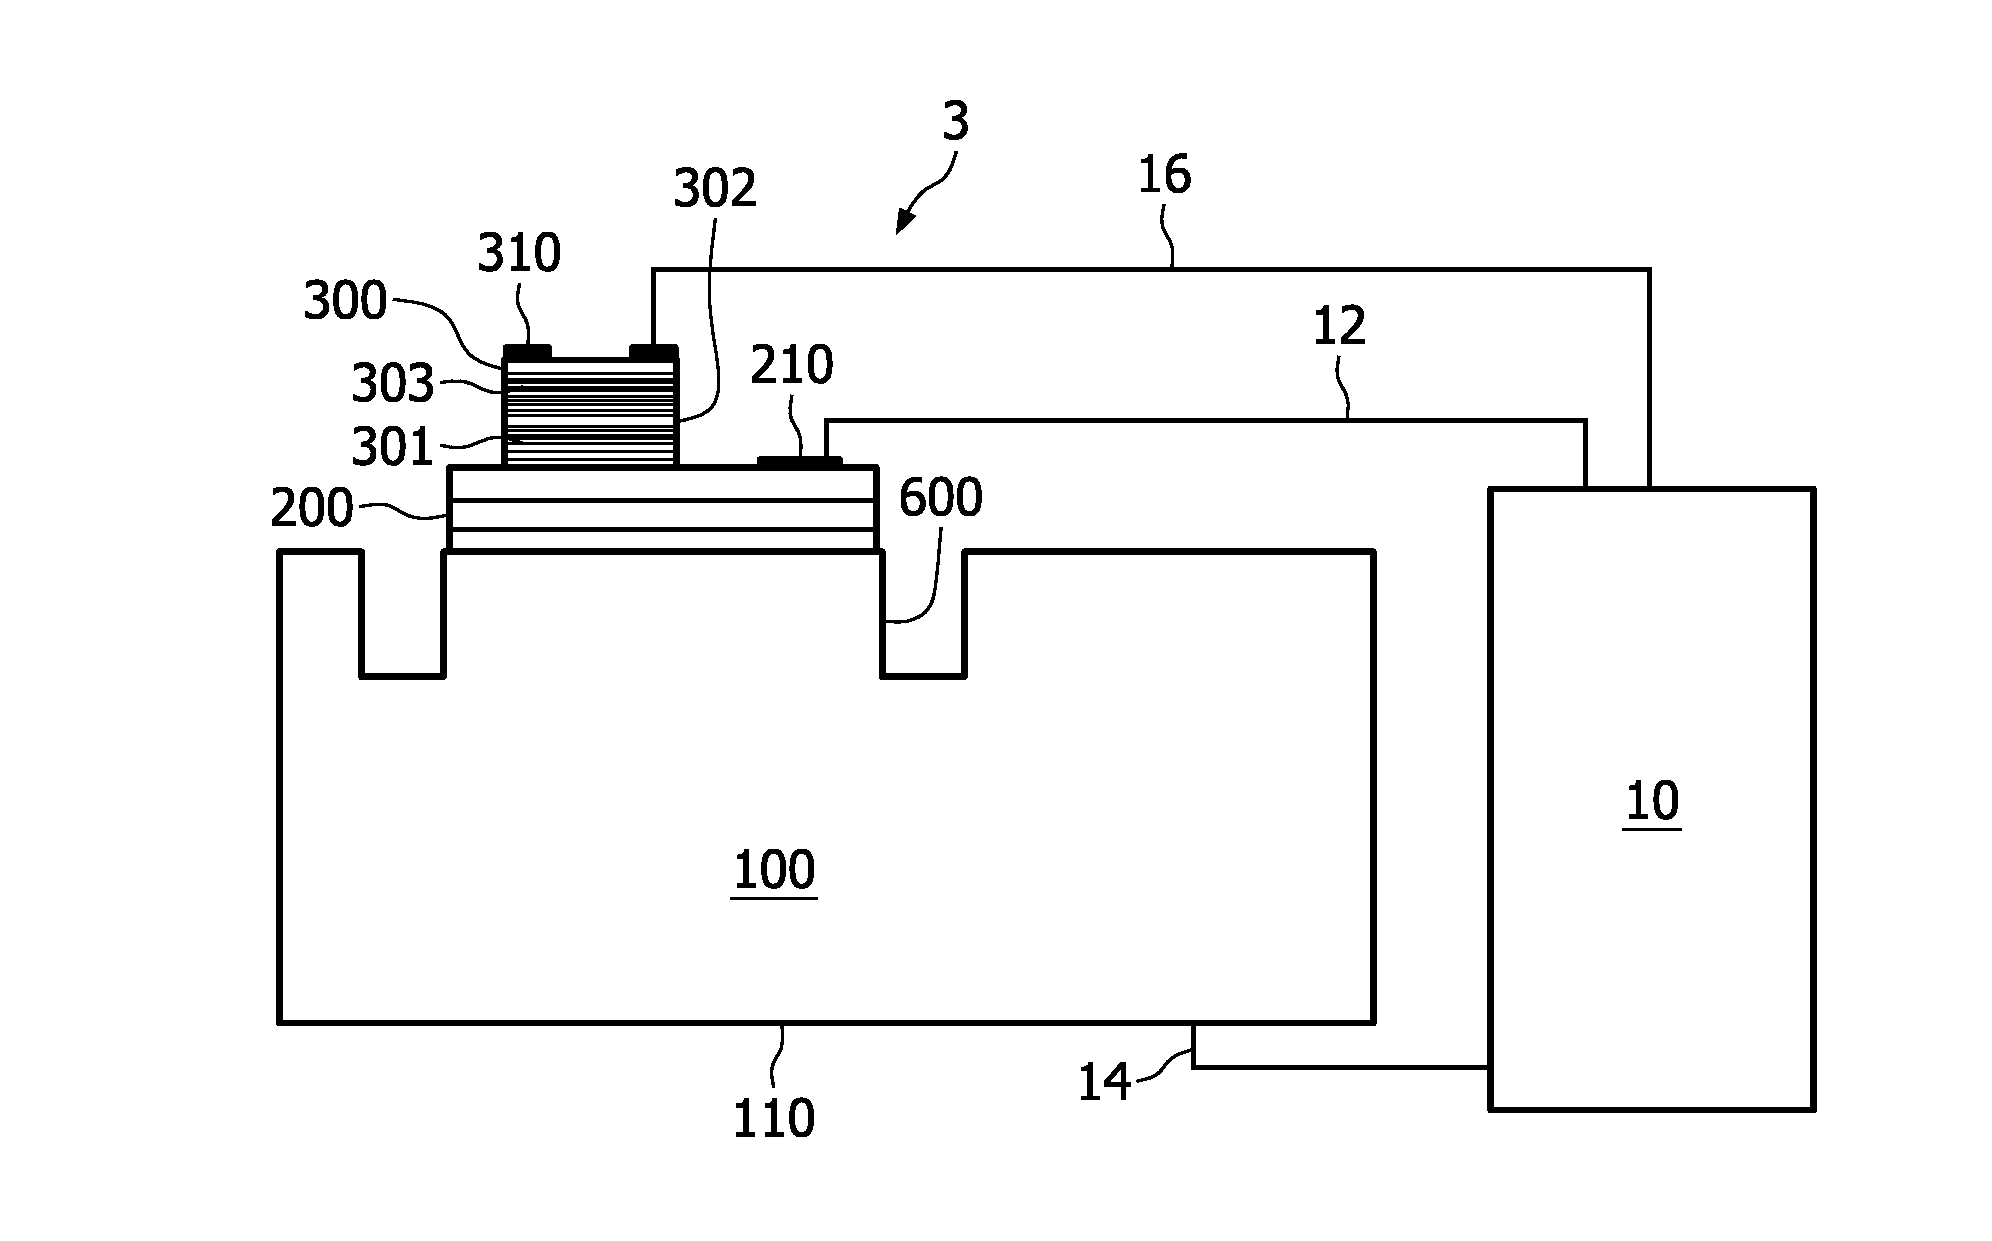 Wavelength-controlled semiconductor laser device